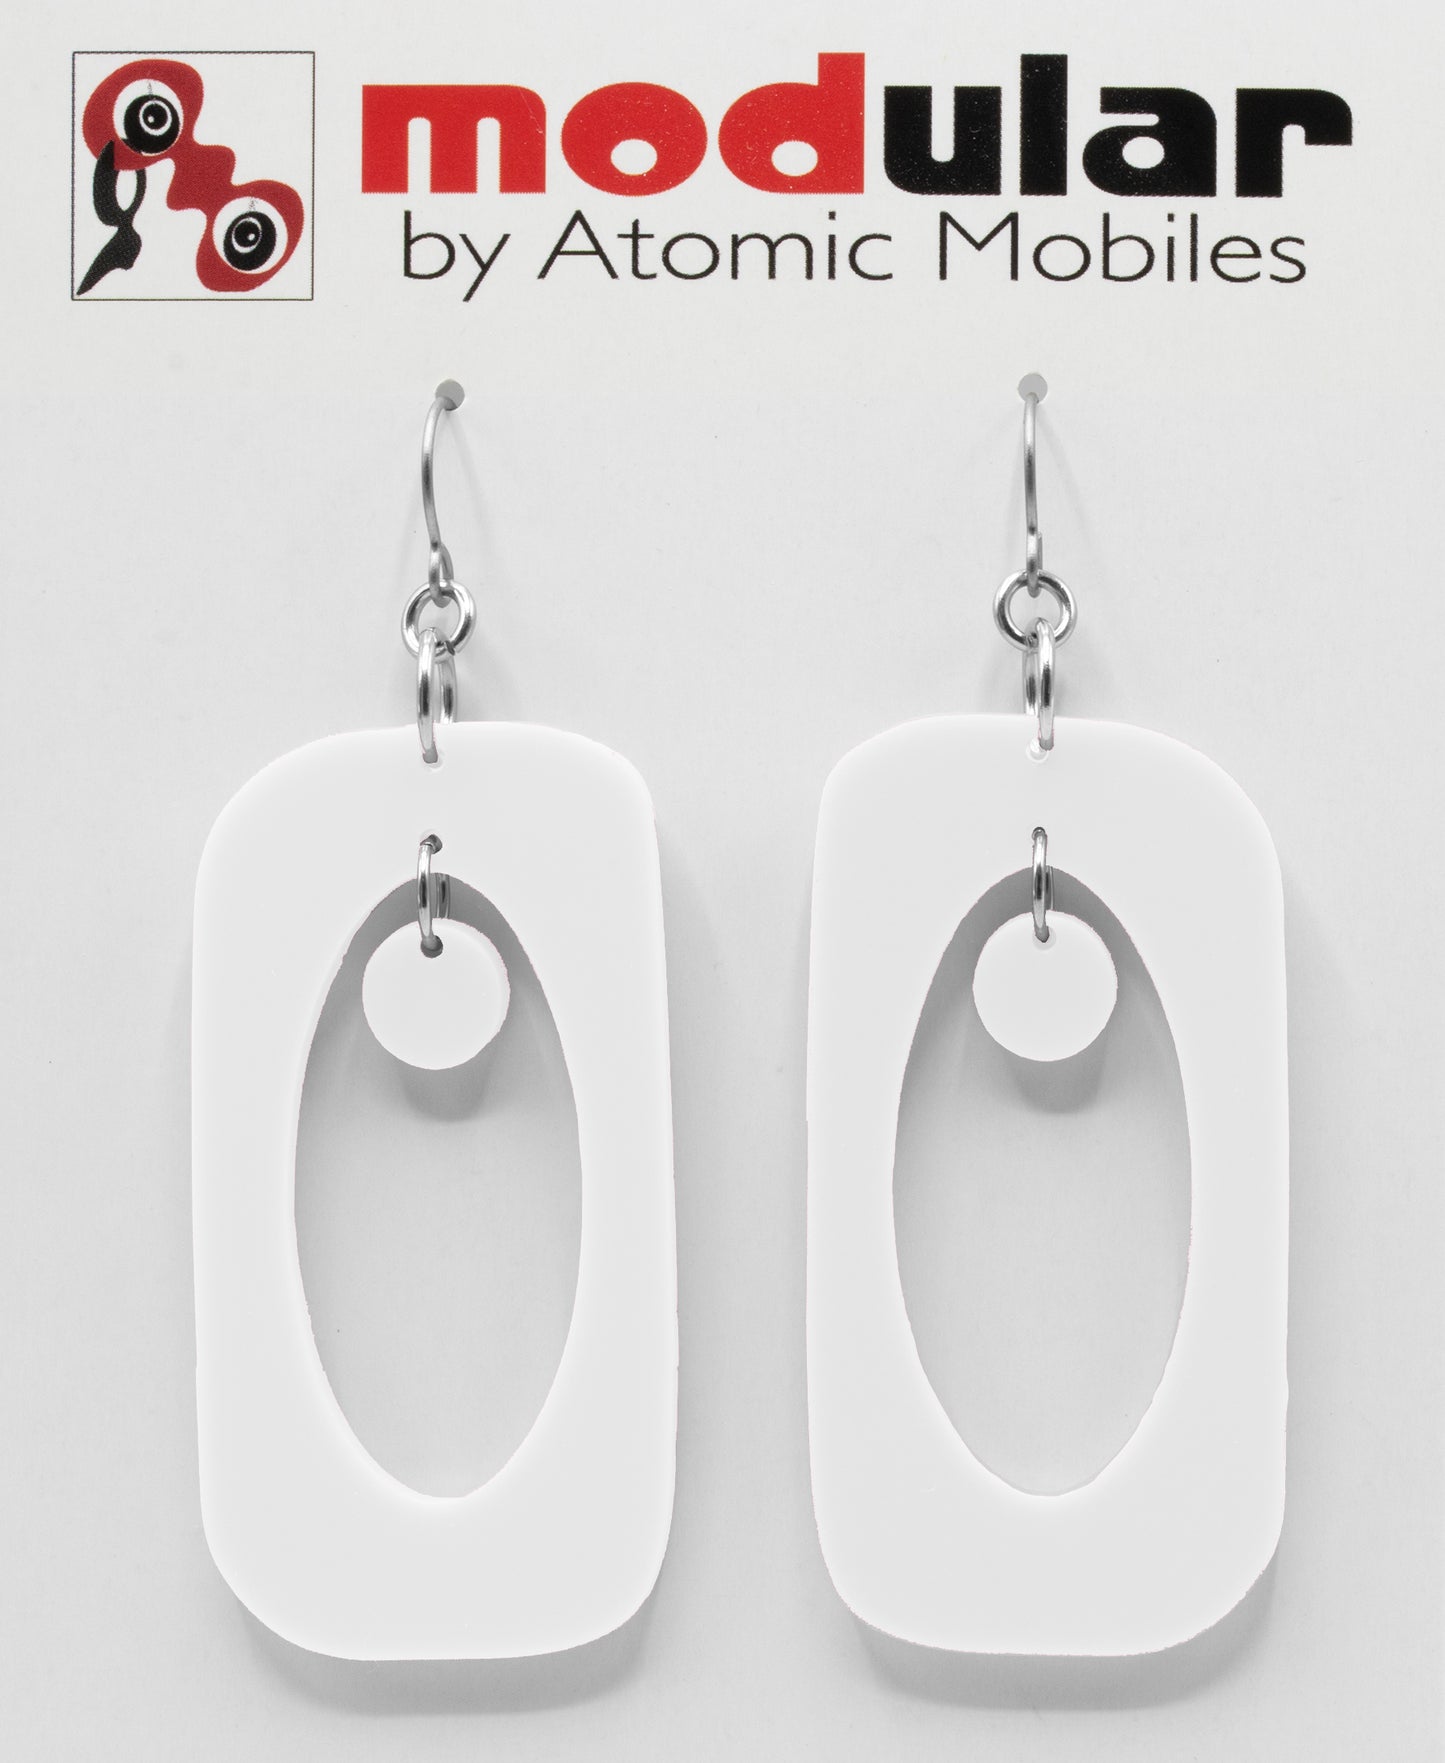 Beatnik Boho Atomic Earrings in White by AtomicMobiles.com in Wistful White - mod retro midcentury inspired jewelry